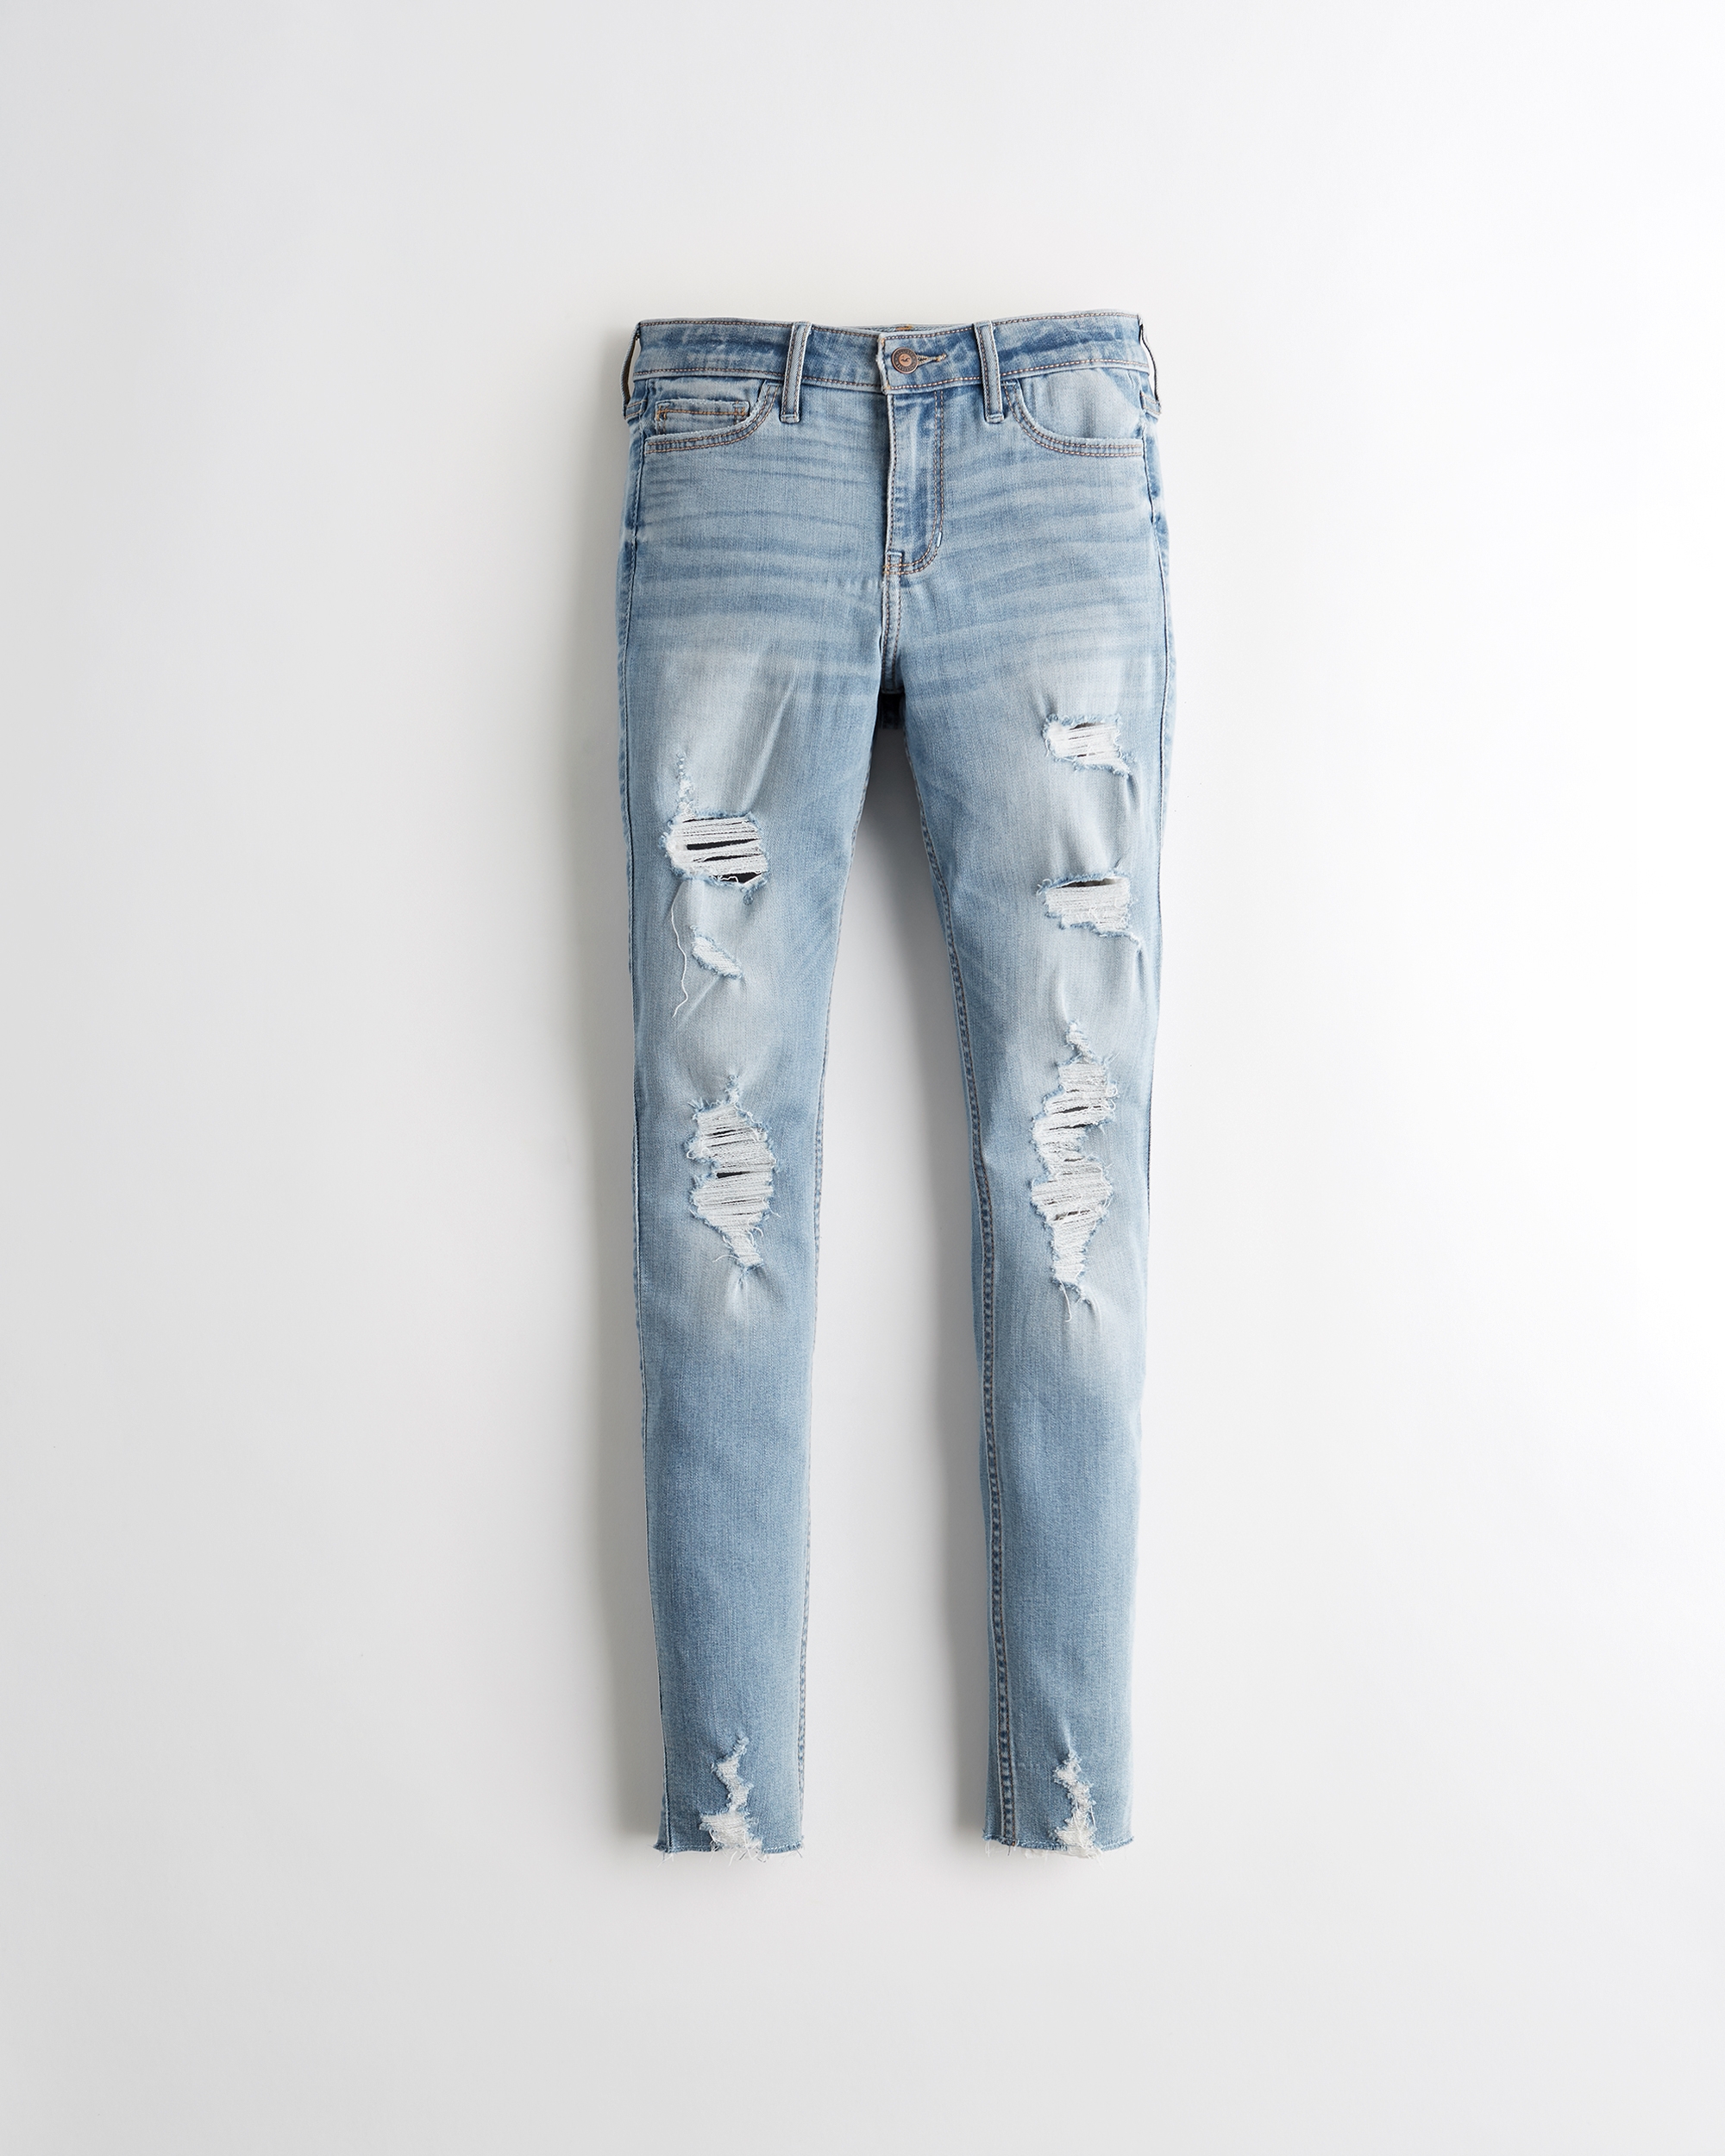 hollister mid rise jeans